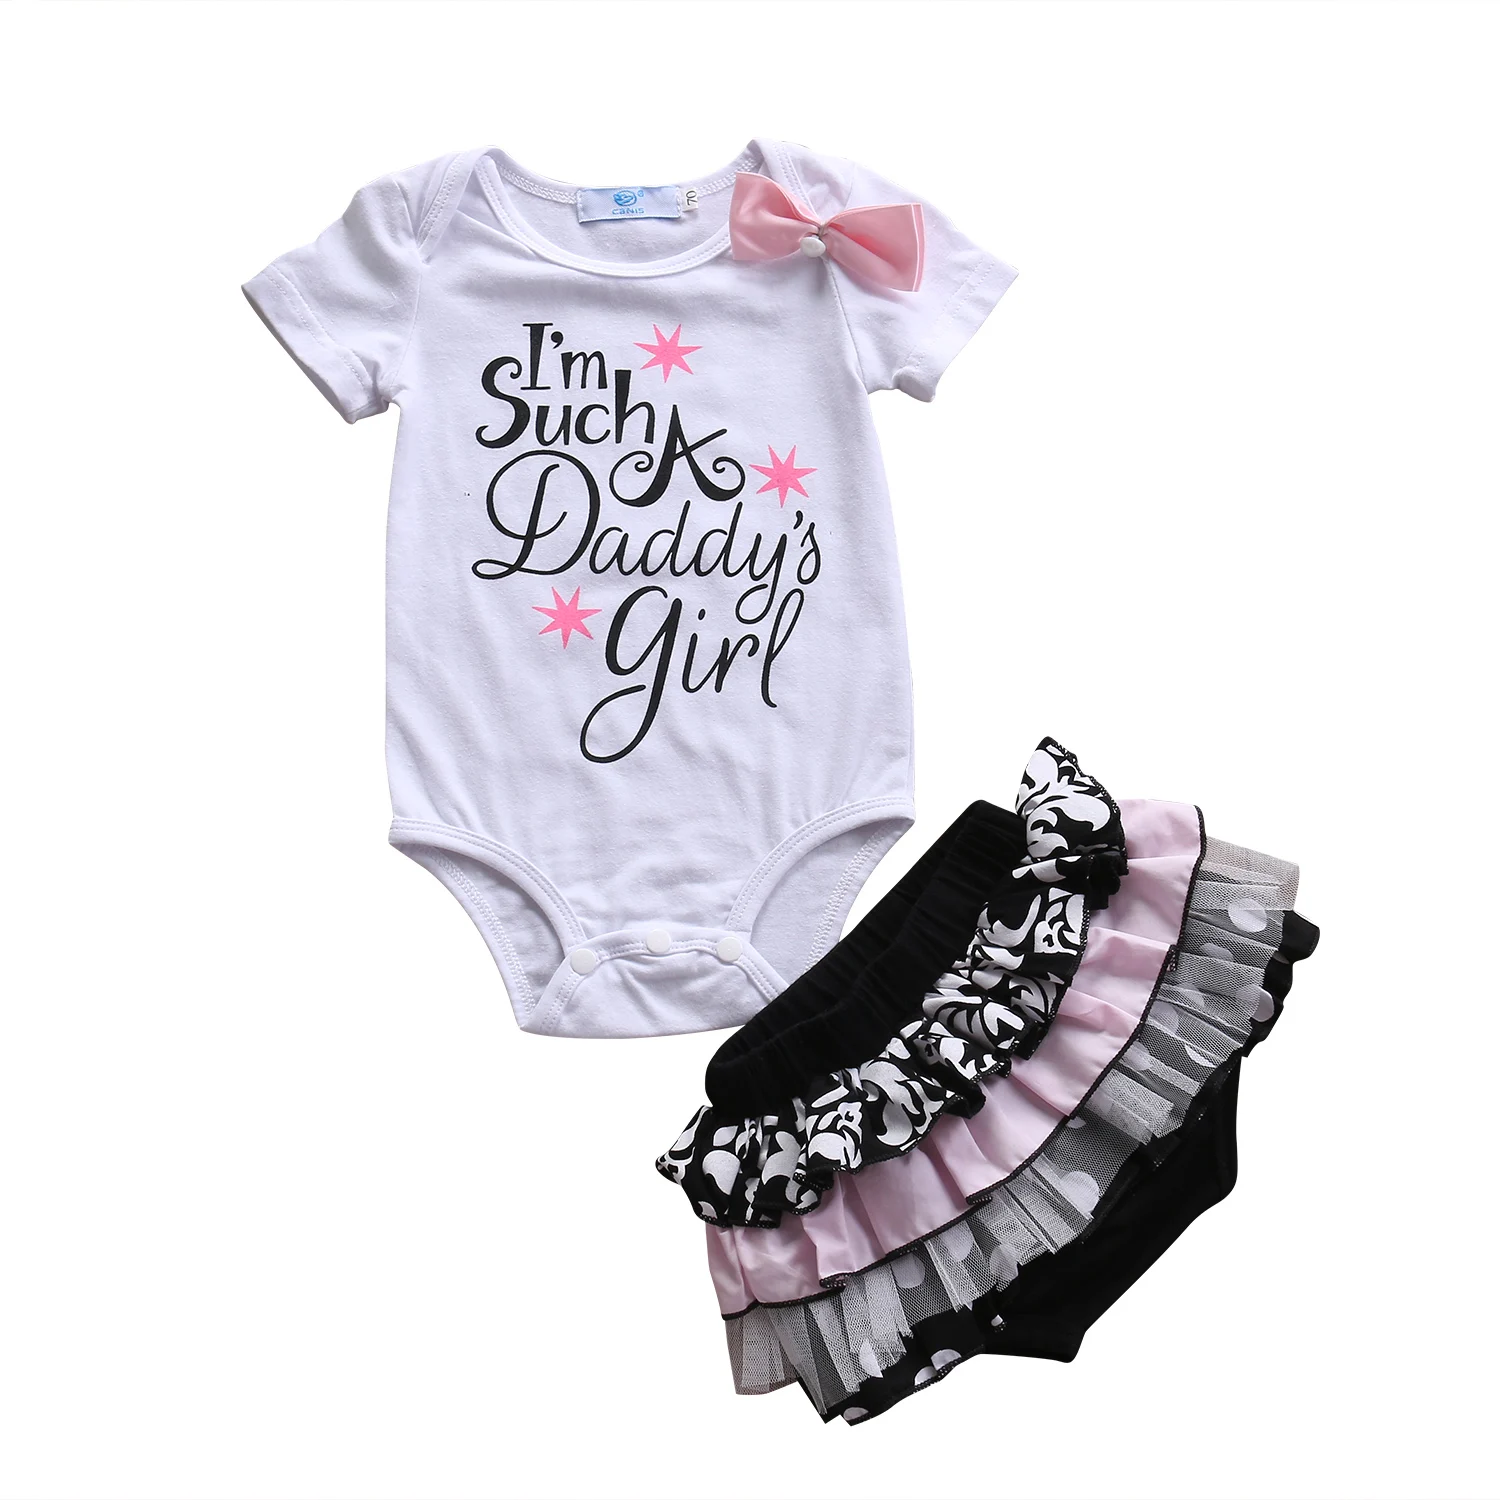 

New Style Newborn Baby Girls Clothes Summer Cotton Short Sleeve Romper Lace Polka Dot Shorts Outfits Baby Clothing Set 0-3Y